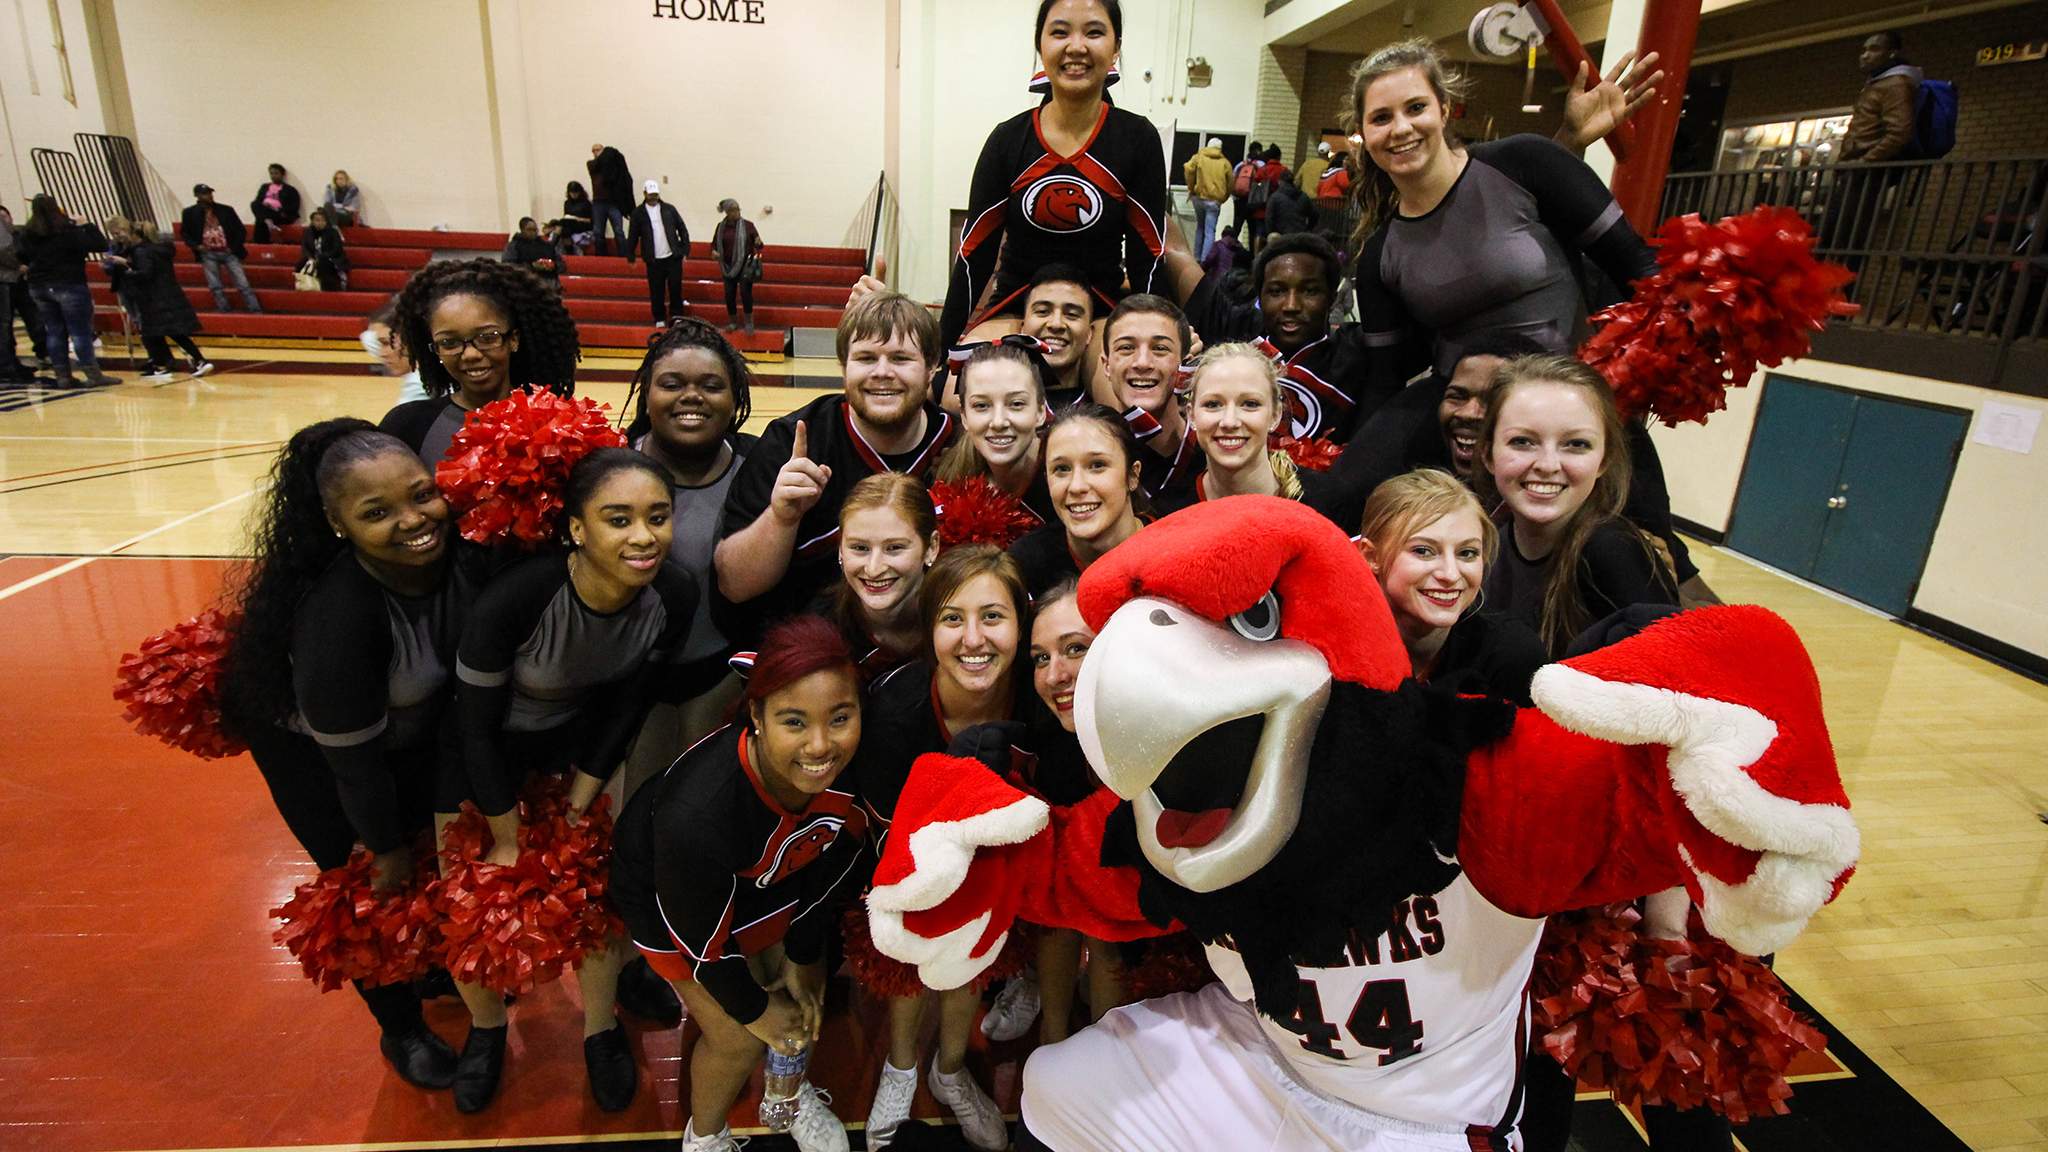 Cheer Club and Rocky at Basketball Game